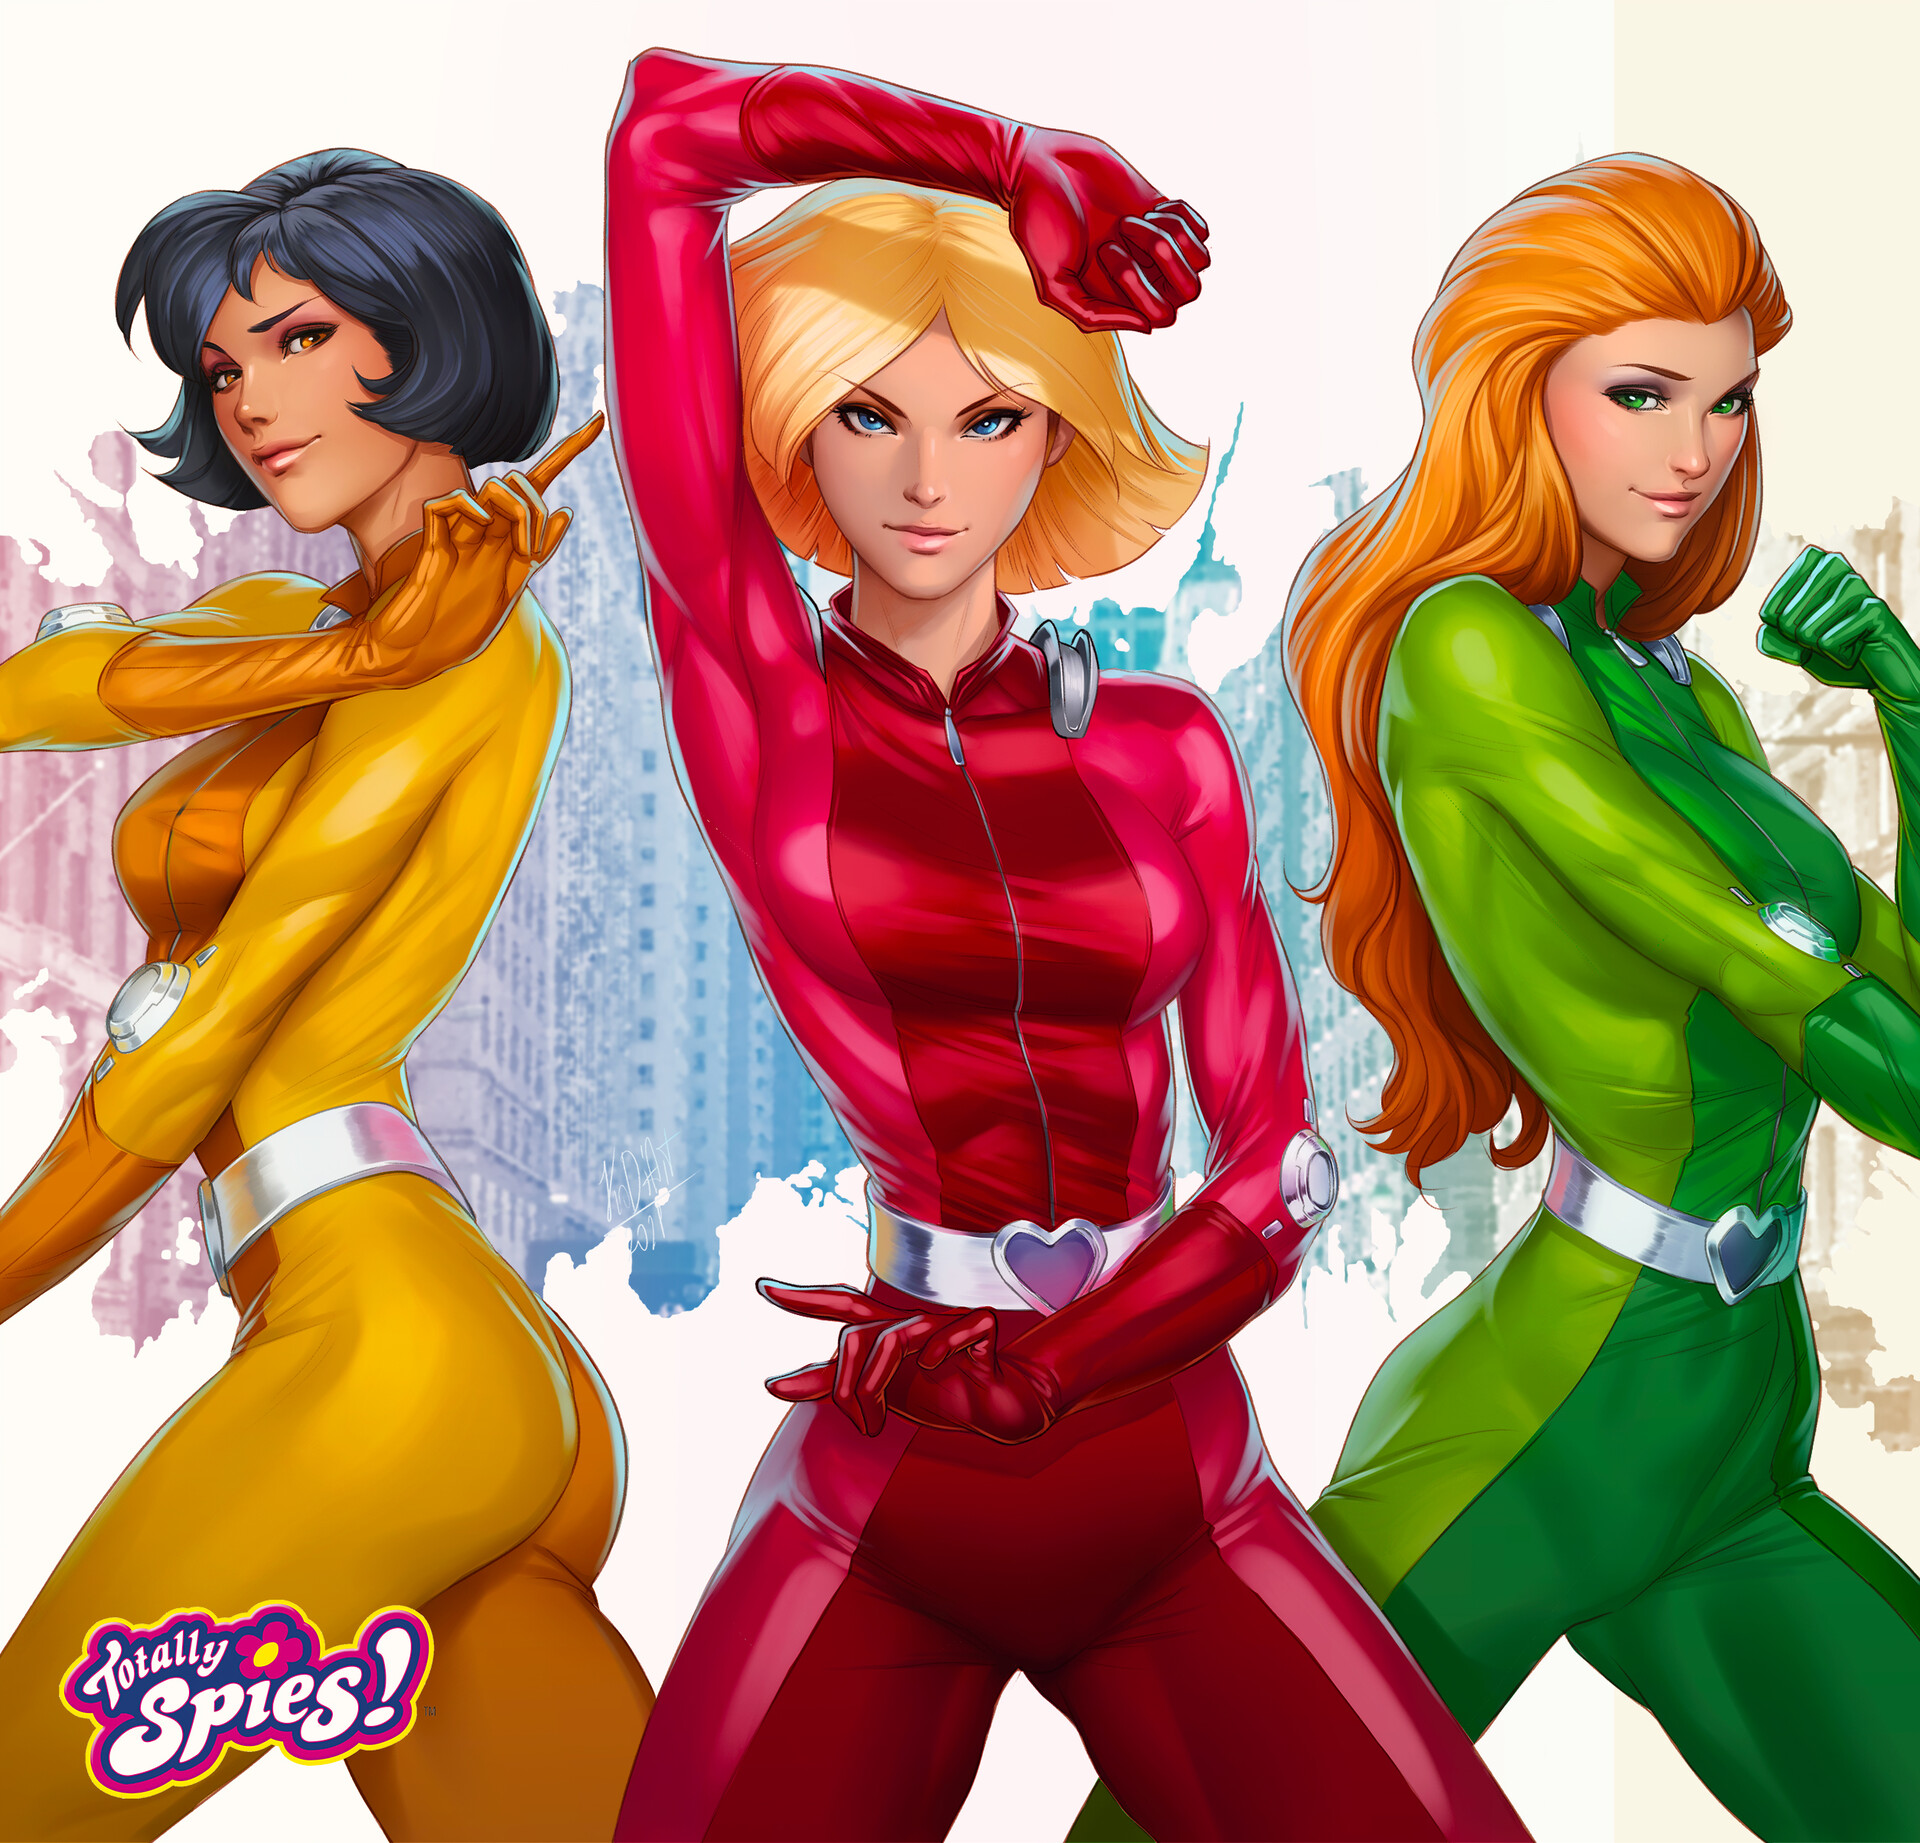 Totally spies unofficial cover)I seen only 15 minutes of some random episod...